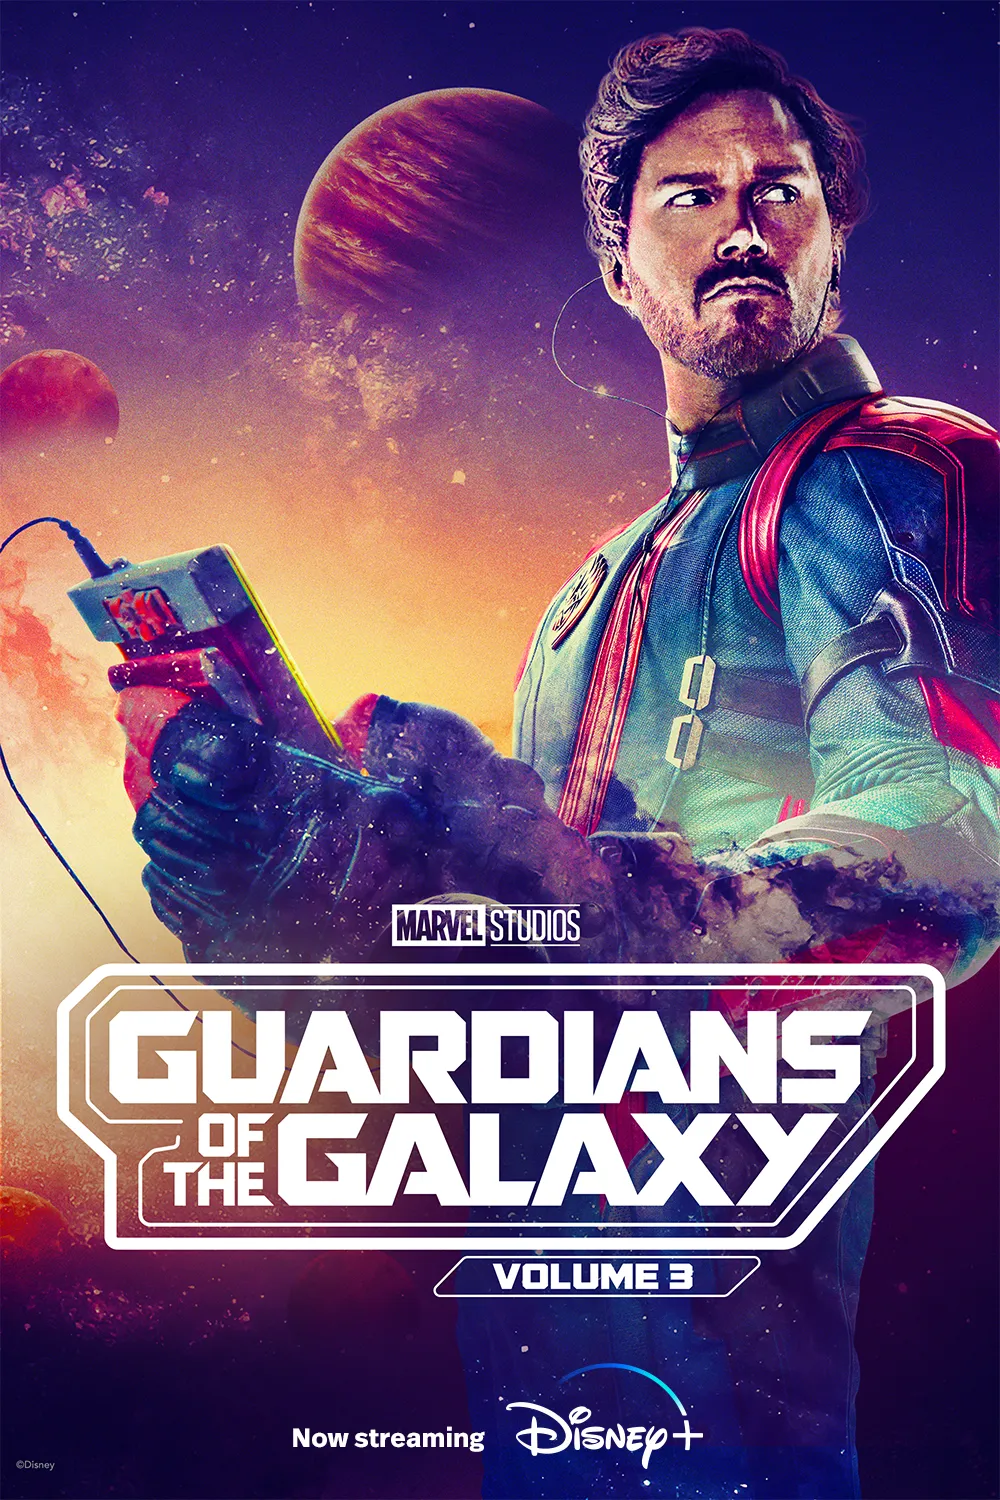 Guardians of the Galaxy Vol. 3 on Disney+ movie poster: The Guardians reunite to save the galaxy from a new threat, but their friendship is tested as they face their darkest chapter yet.